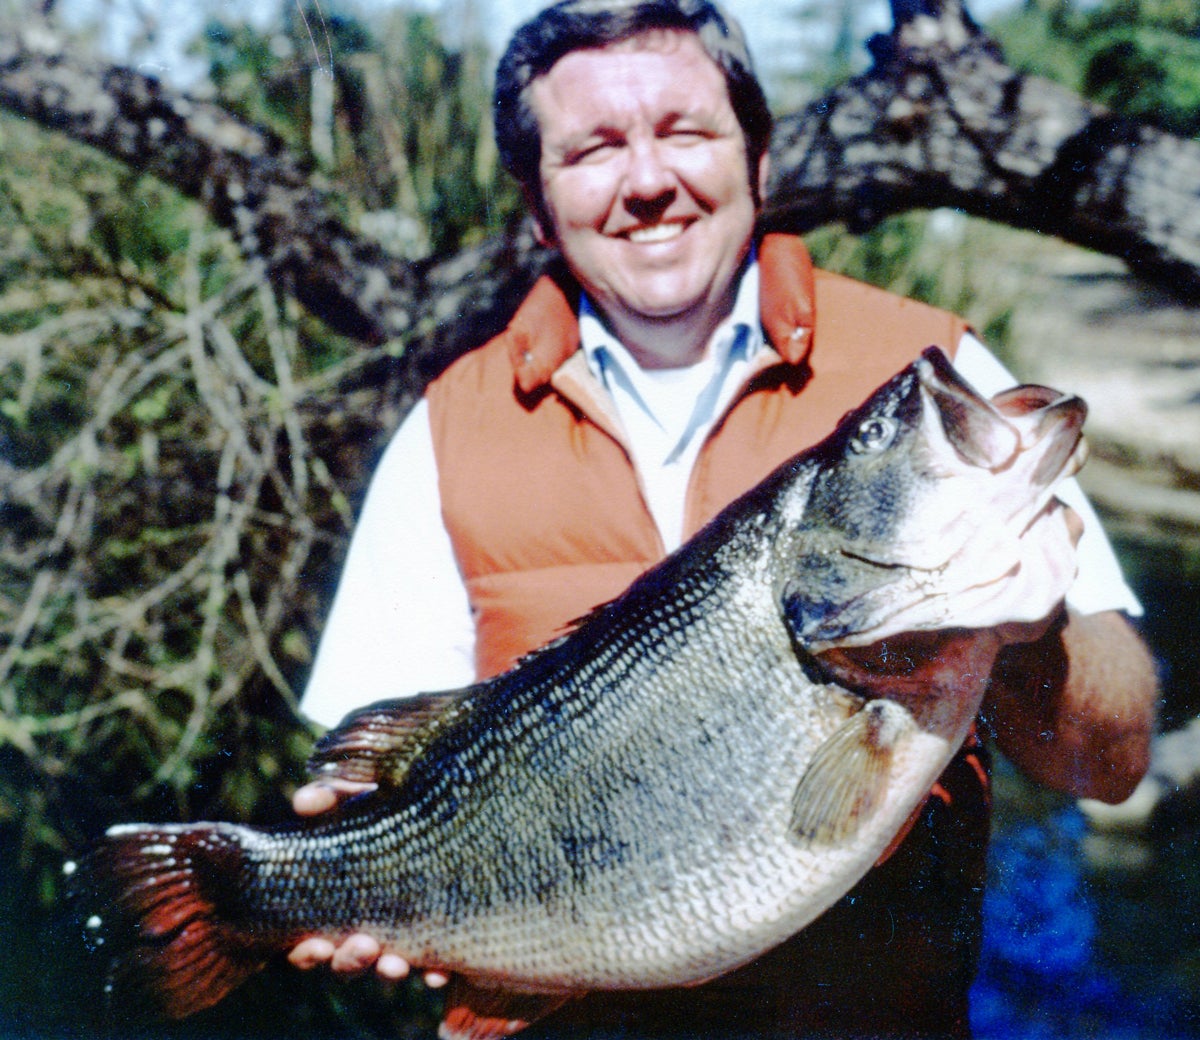 It's official. The Japan bass is a world record.